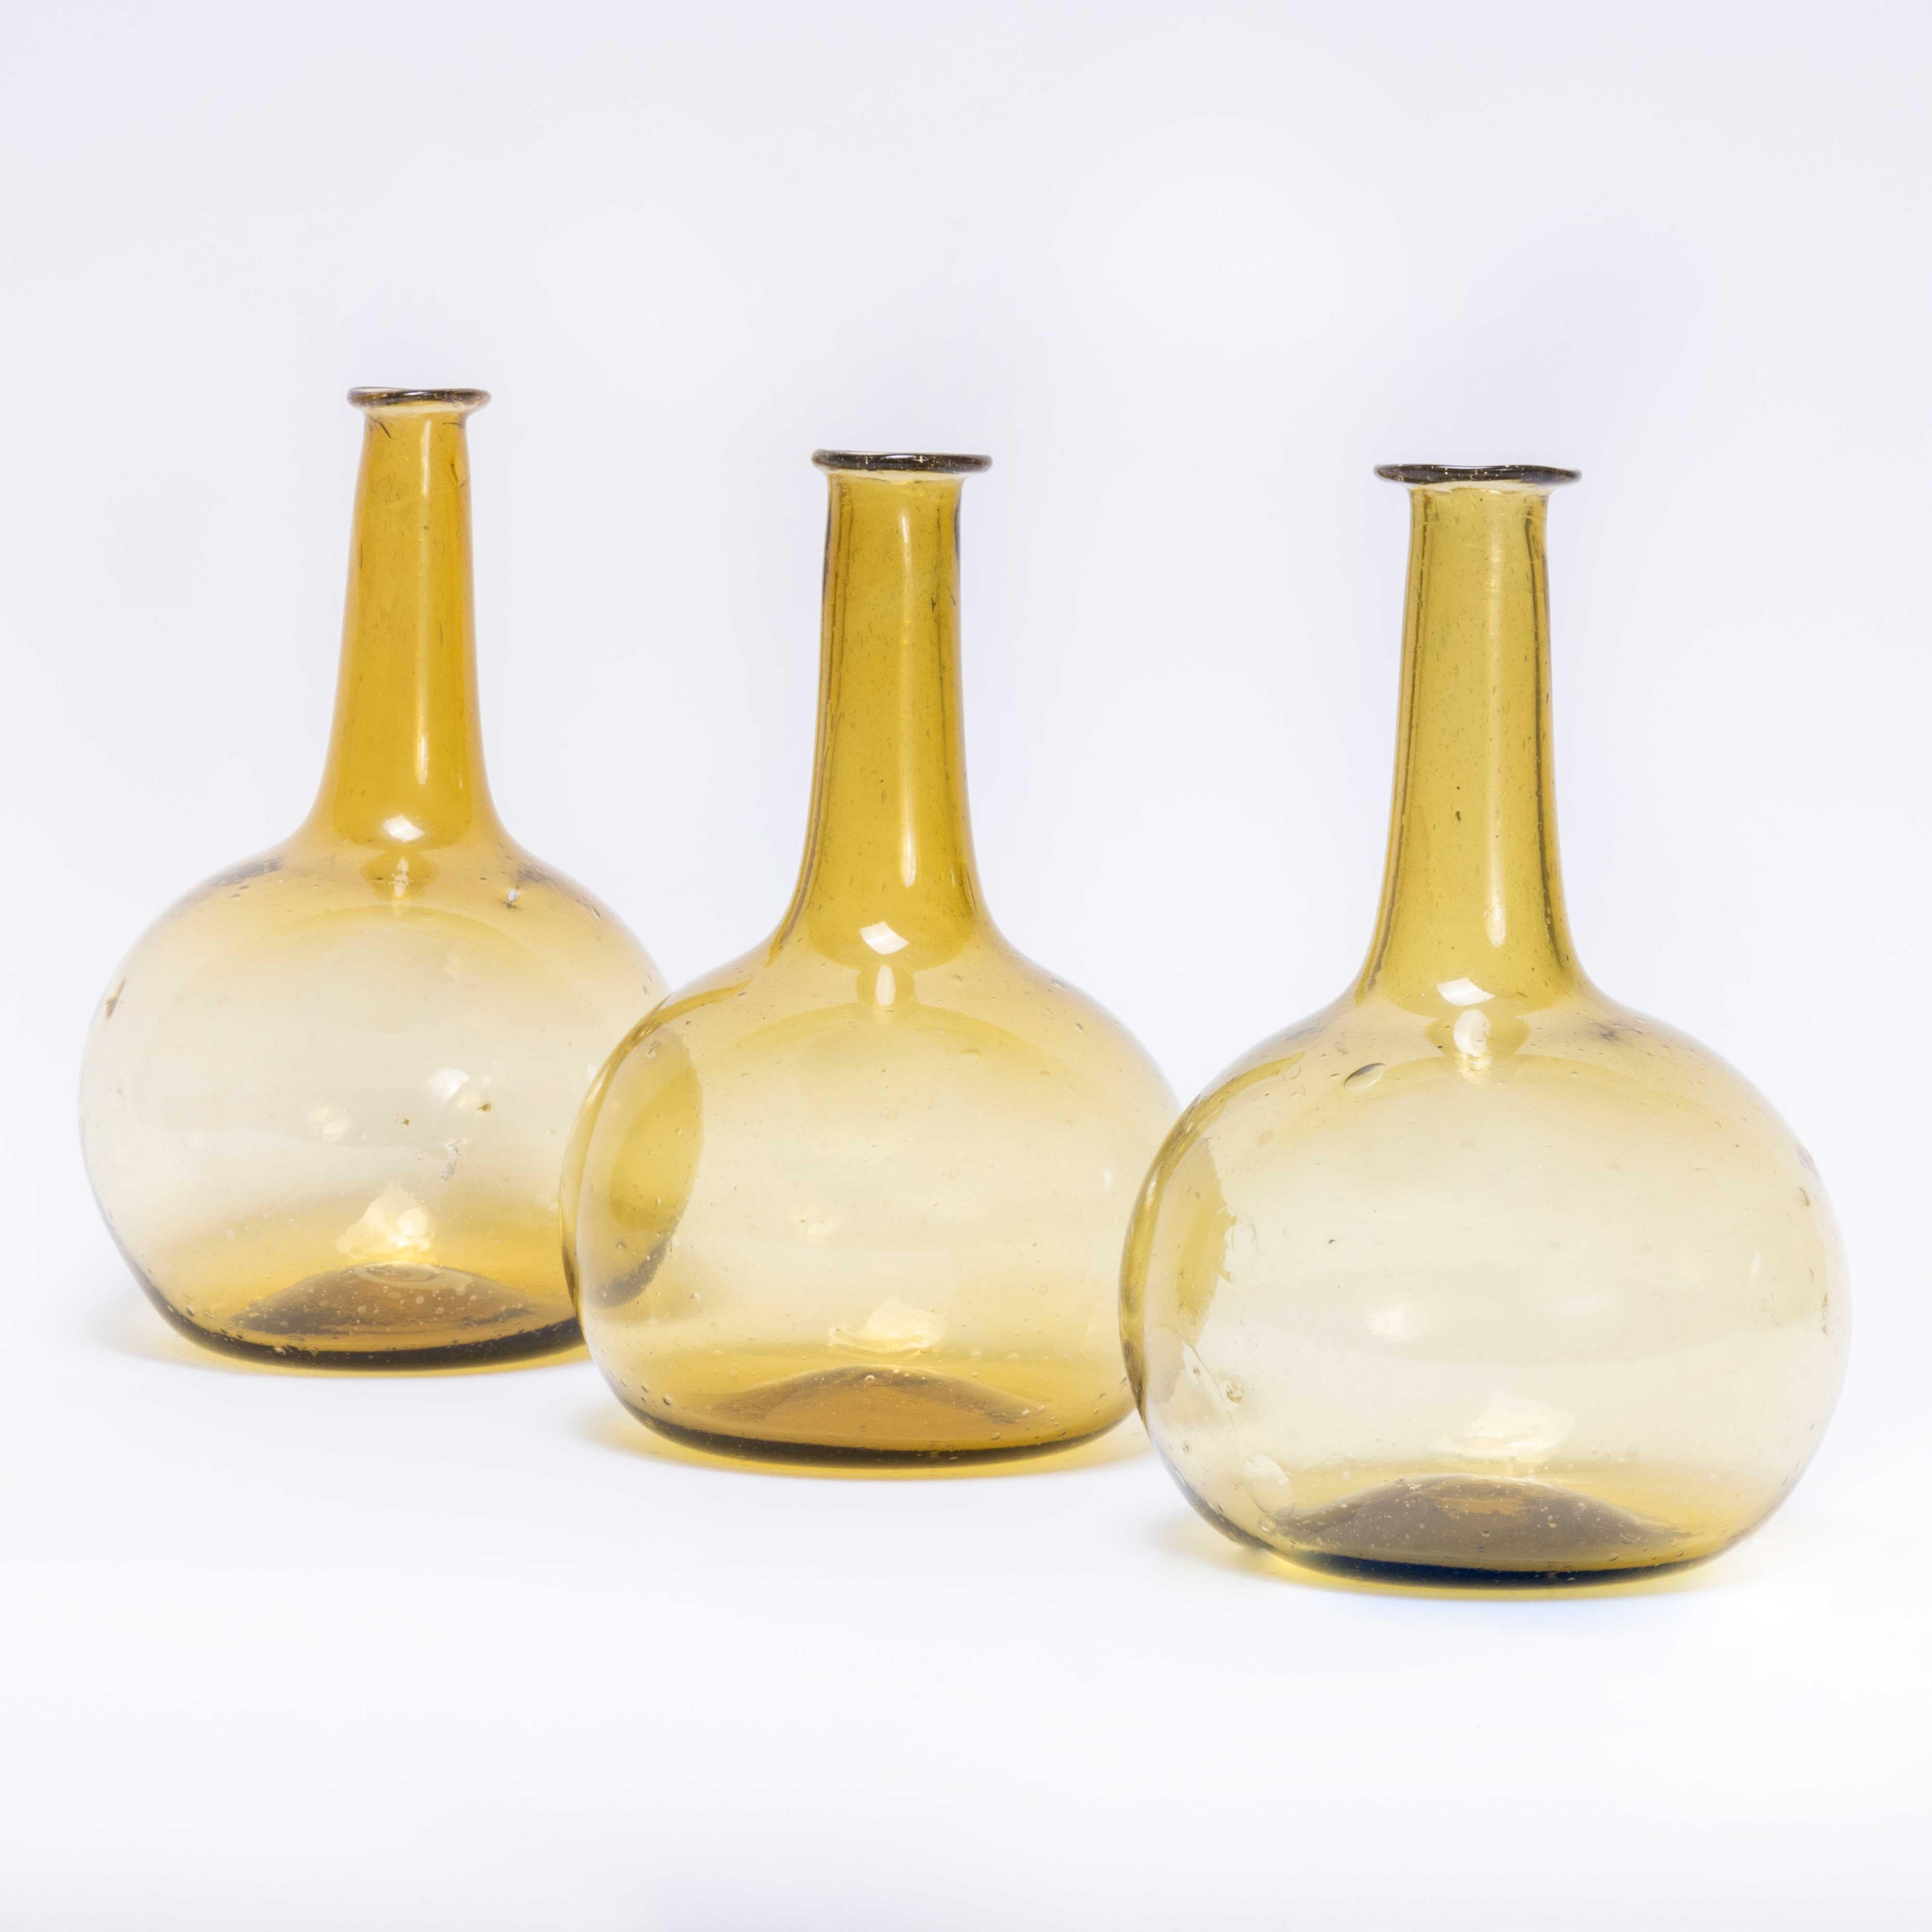 Moroccan Water Jug – Ochre
Moroccan Water Jug – Ochre. Hand-made in Morocco. The glass is mouth blown and available in a beautiful ochre colour. Due to the artisanal quality of production colours may vary. Listing is for one jug.

WORKSHOP